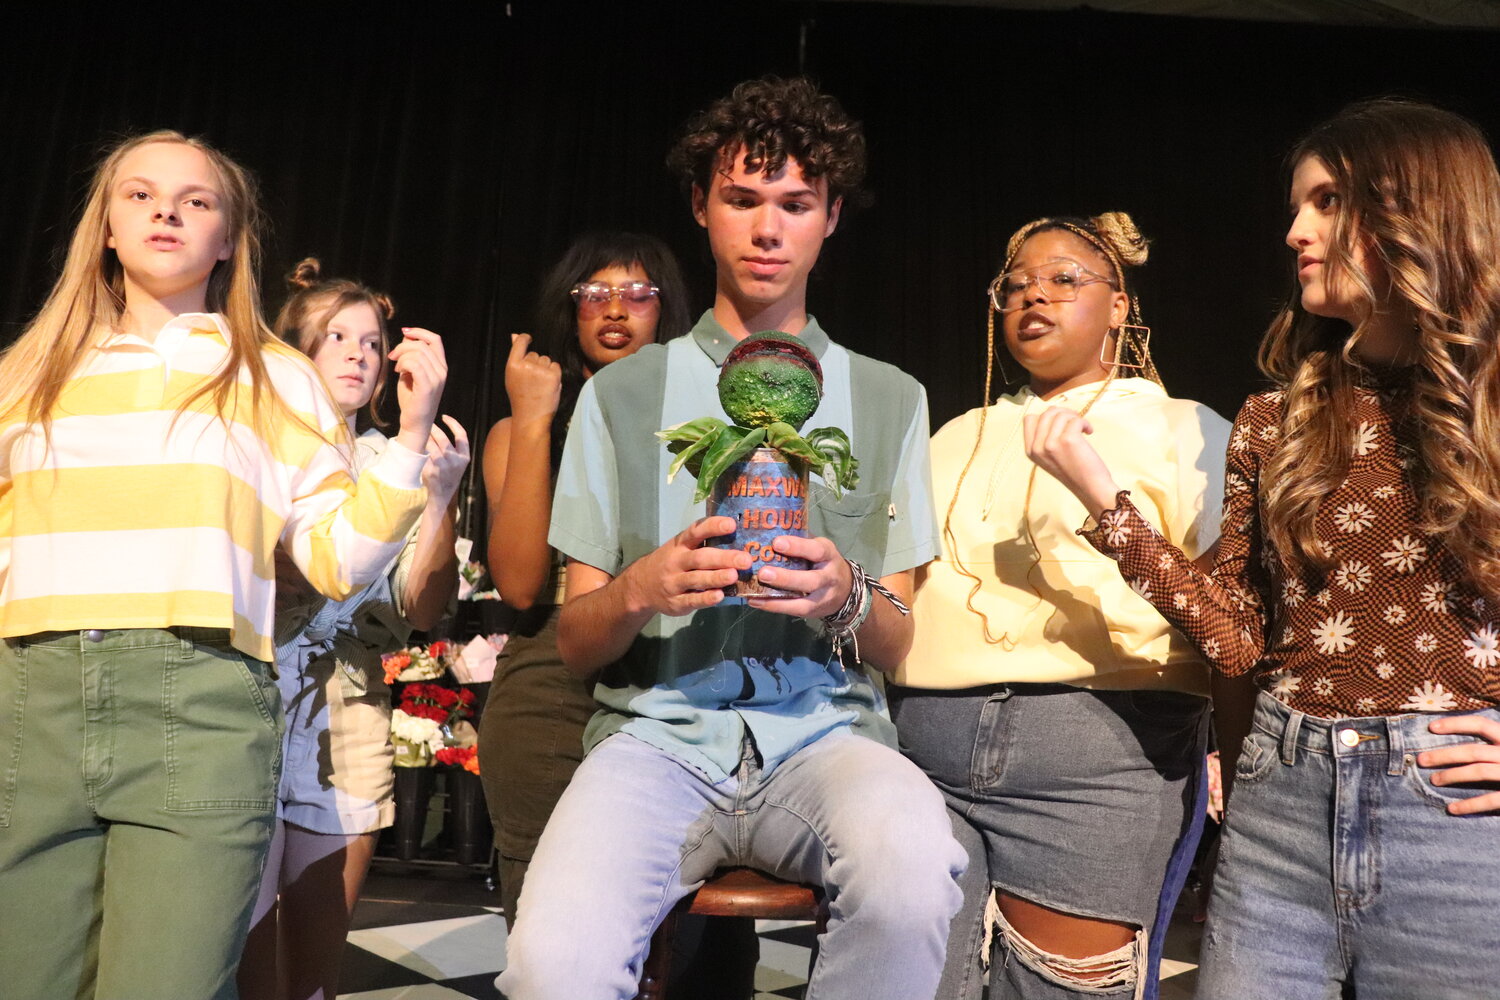 The doo-wop stylings of "Little Shop of Horrors" will fill Spanish Fort High School as students there perform the musical comedy. Here (pictured left to right) Kyla Berry, Parker Pitre, Madison London, Mackenzie Nero, Mia McKray, and Hayden Taylor (center) rehearse.